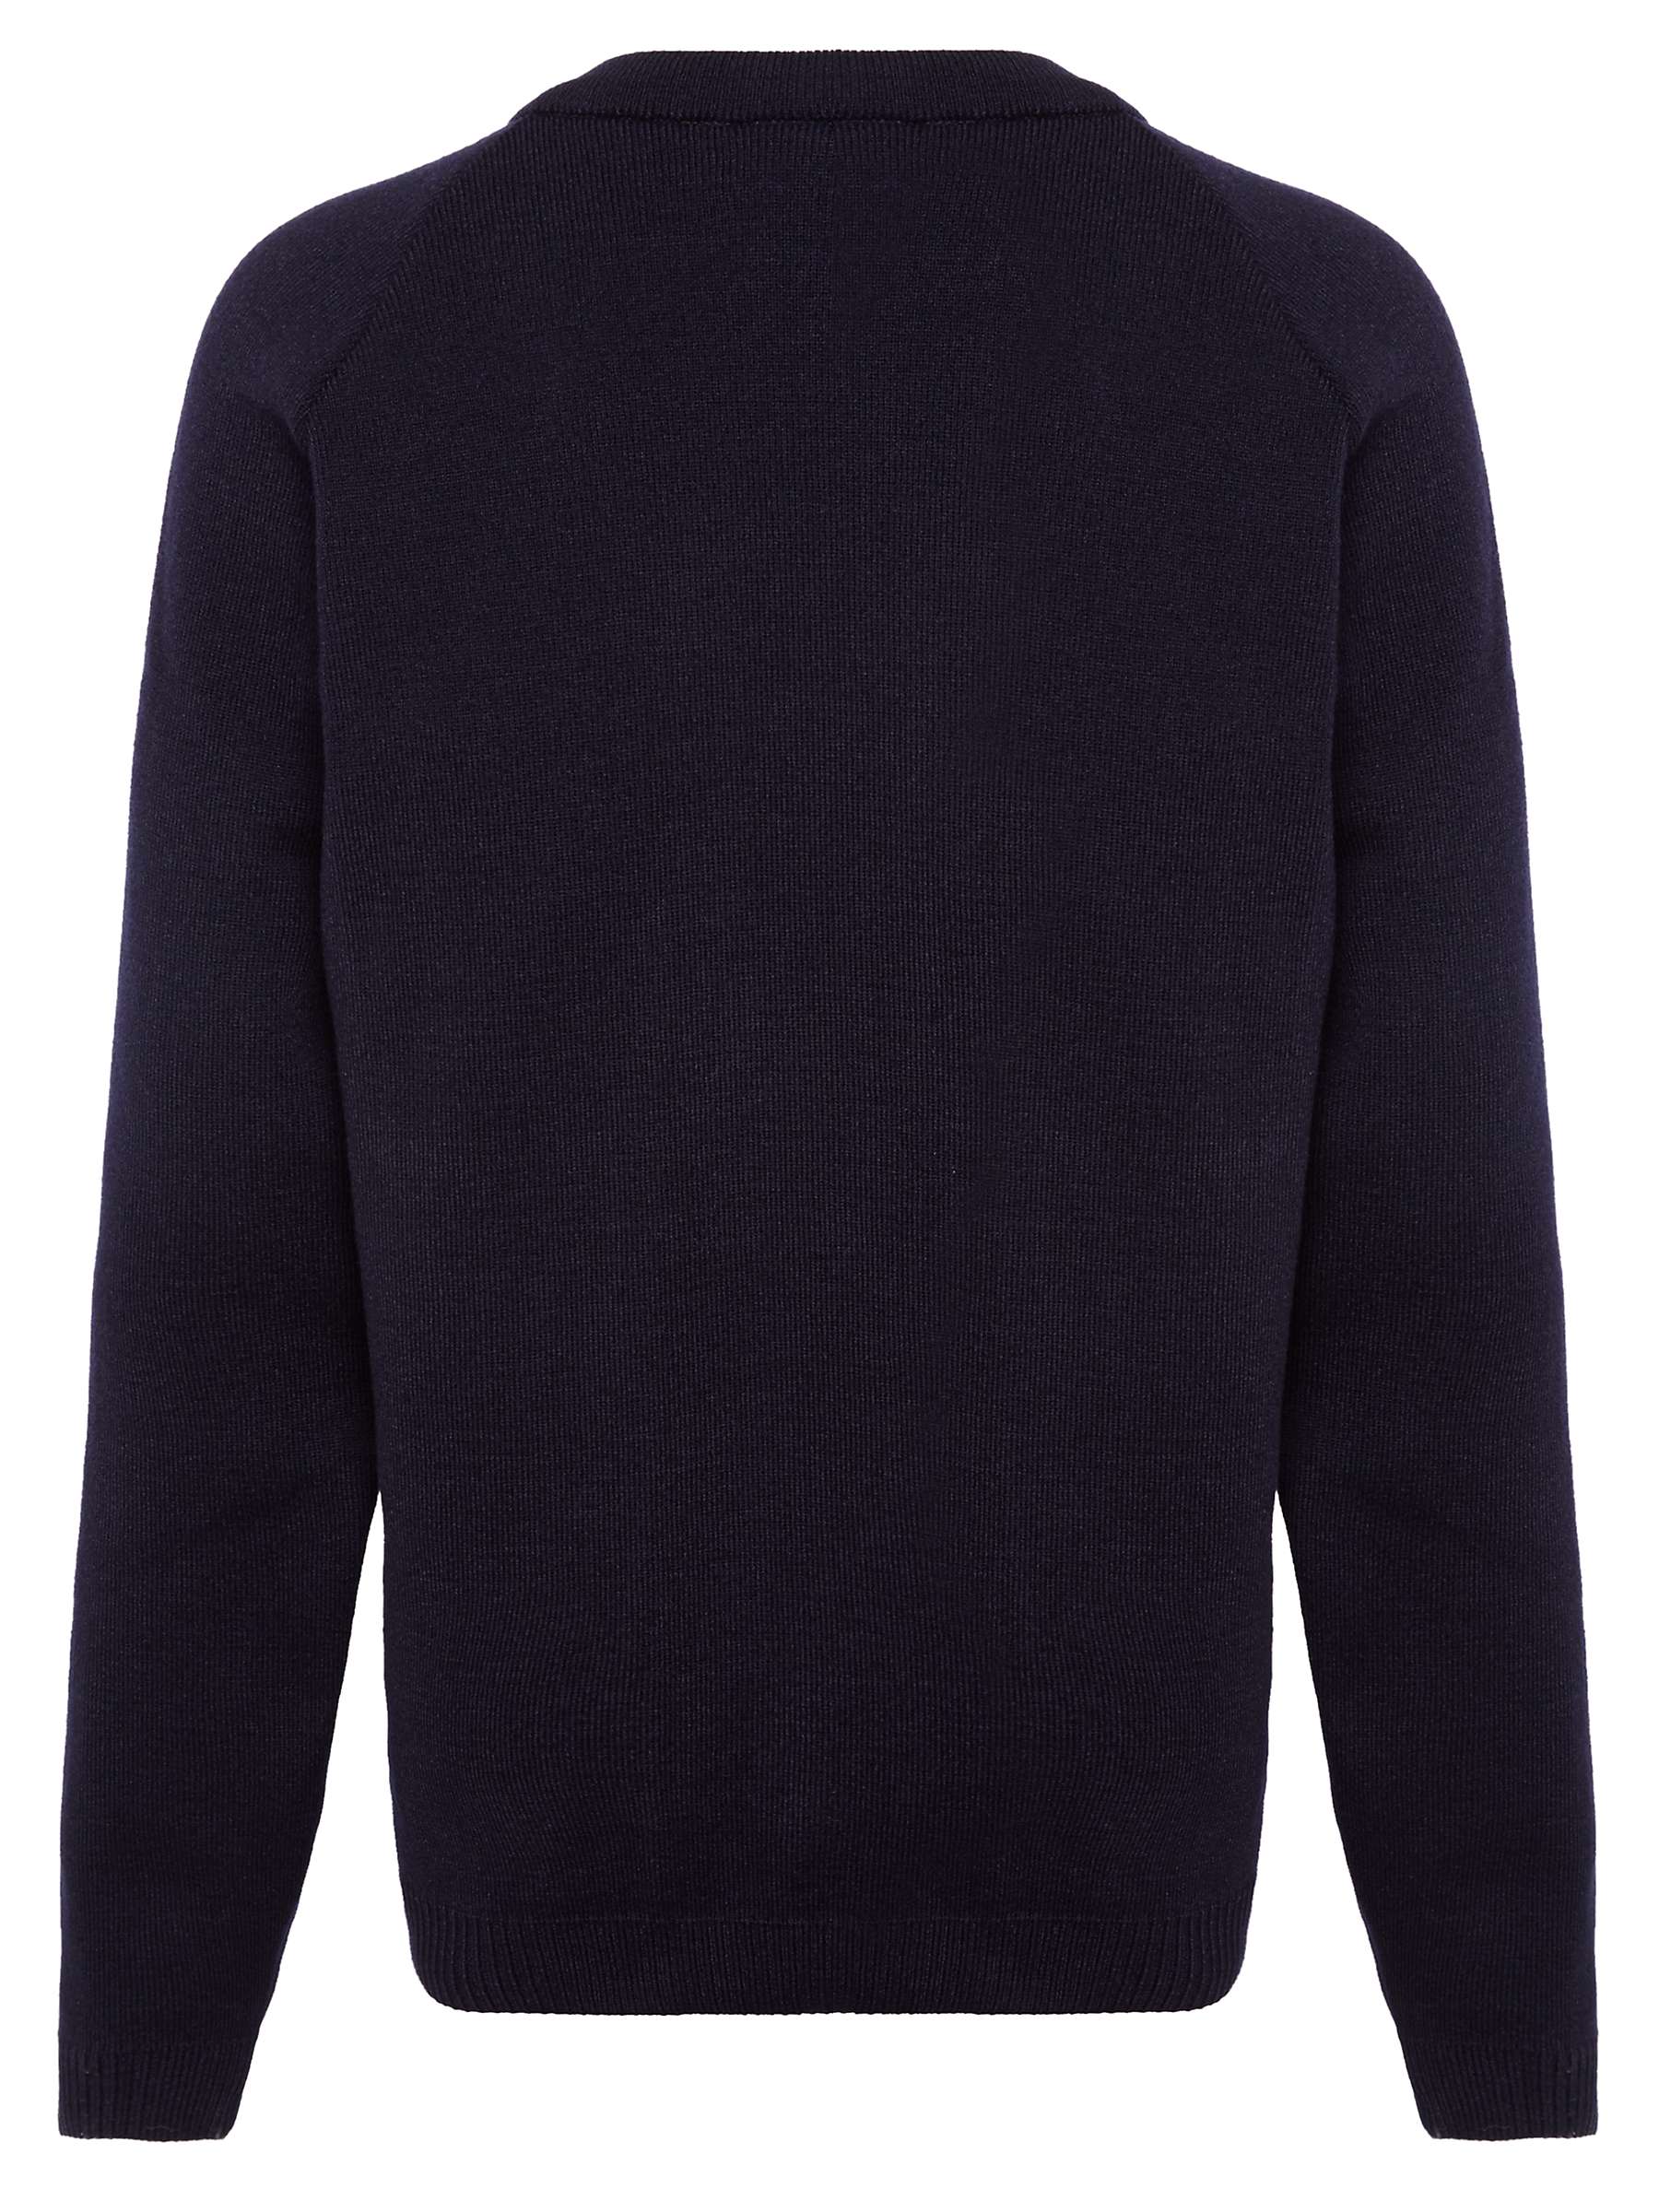 Buy St Mary's School, Cambridge Pullover, Navy Online at johnlewis.com